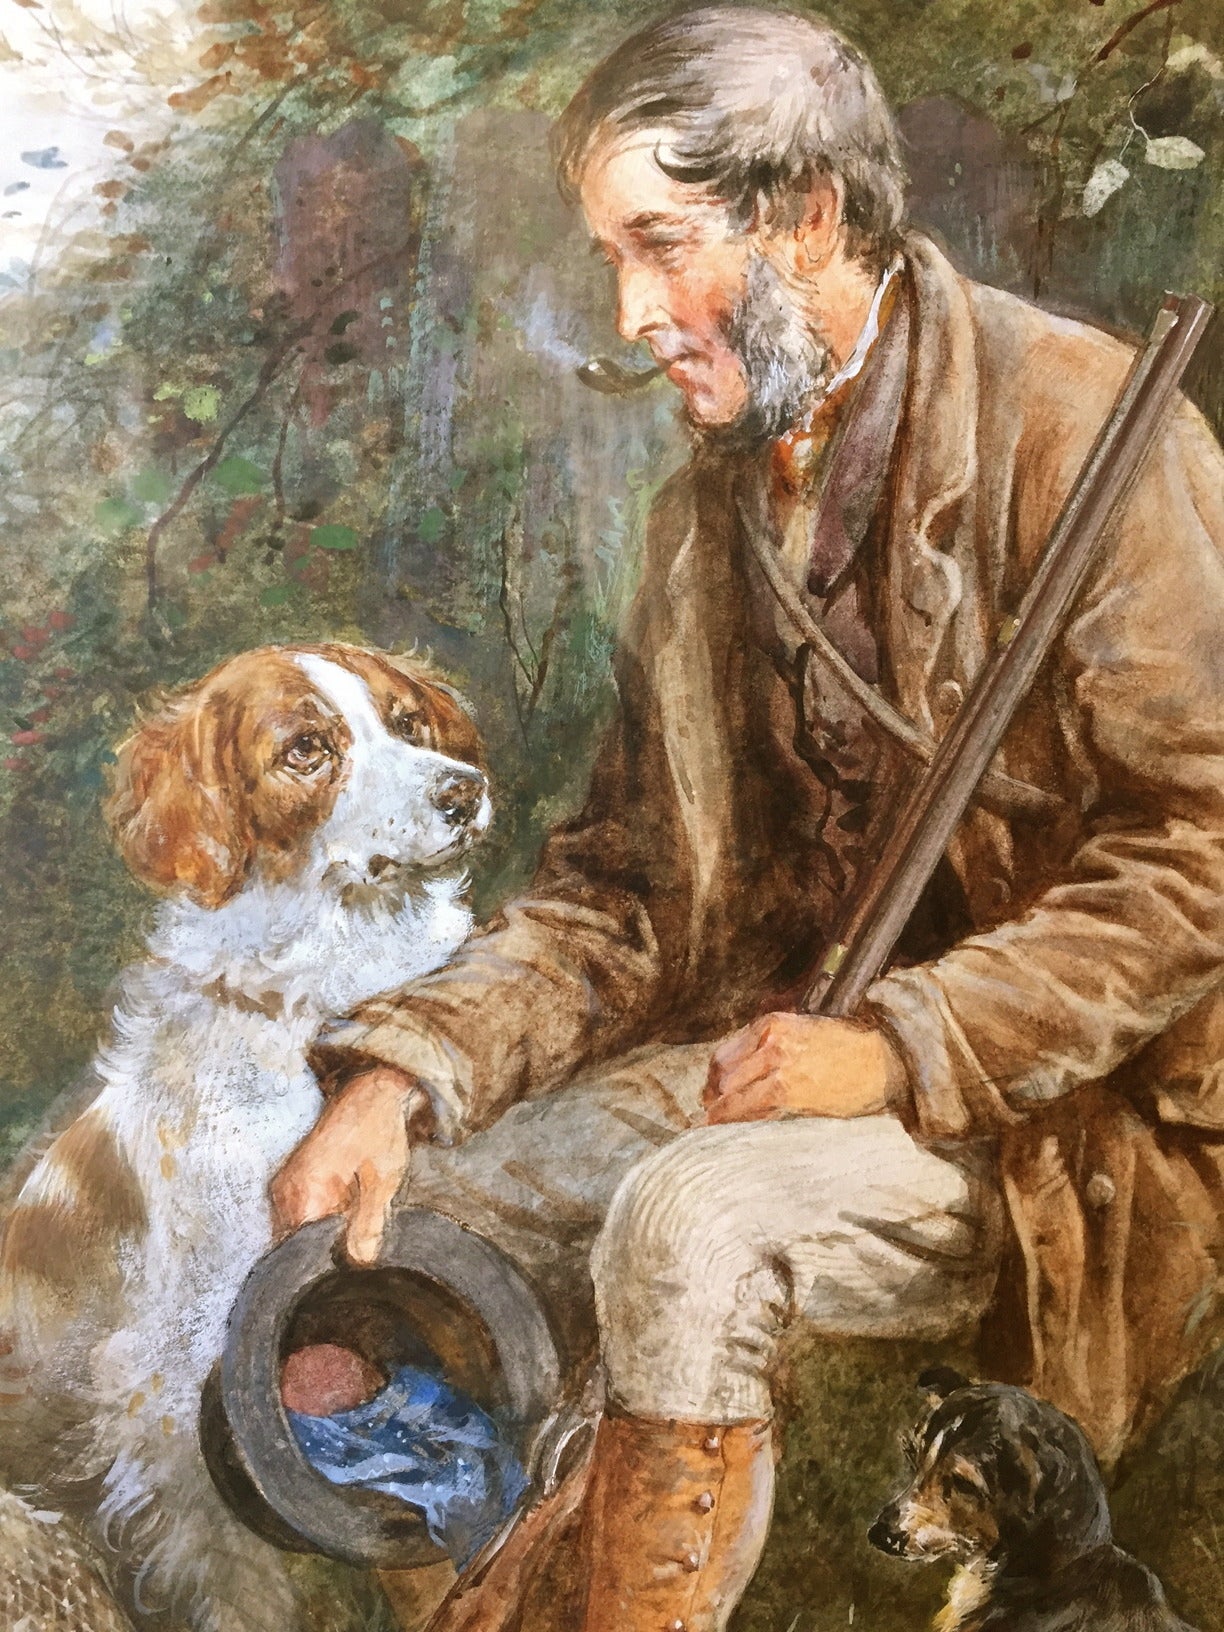 I was compelled to purchase this painting for several reasons first the quality of the work is undeniable, all of the details the faces the loyal Dog and puppy lots of character, the coloration is fantastic very strong with no fading. My father is a